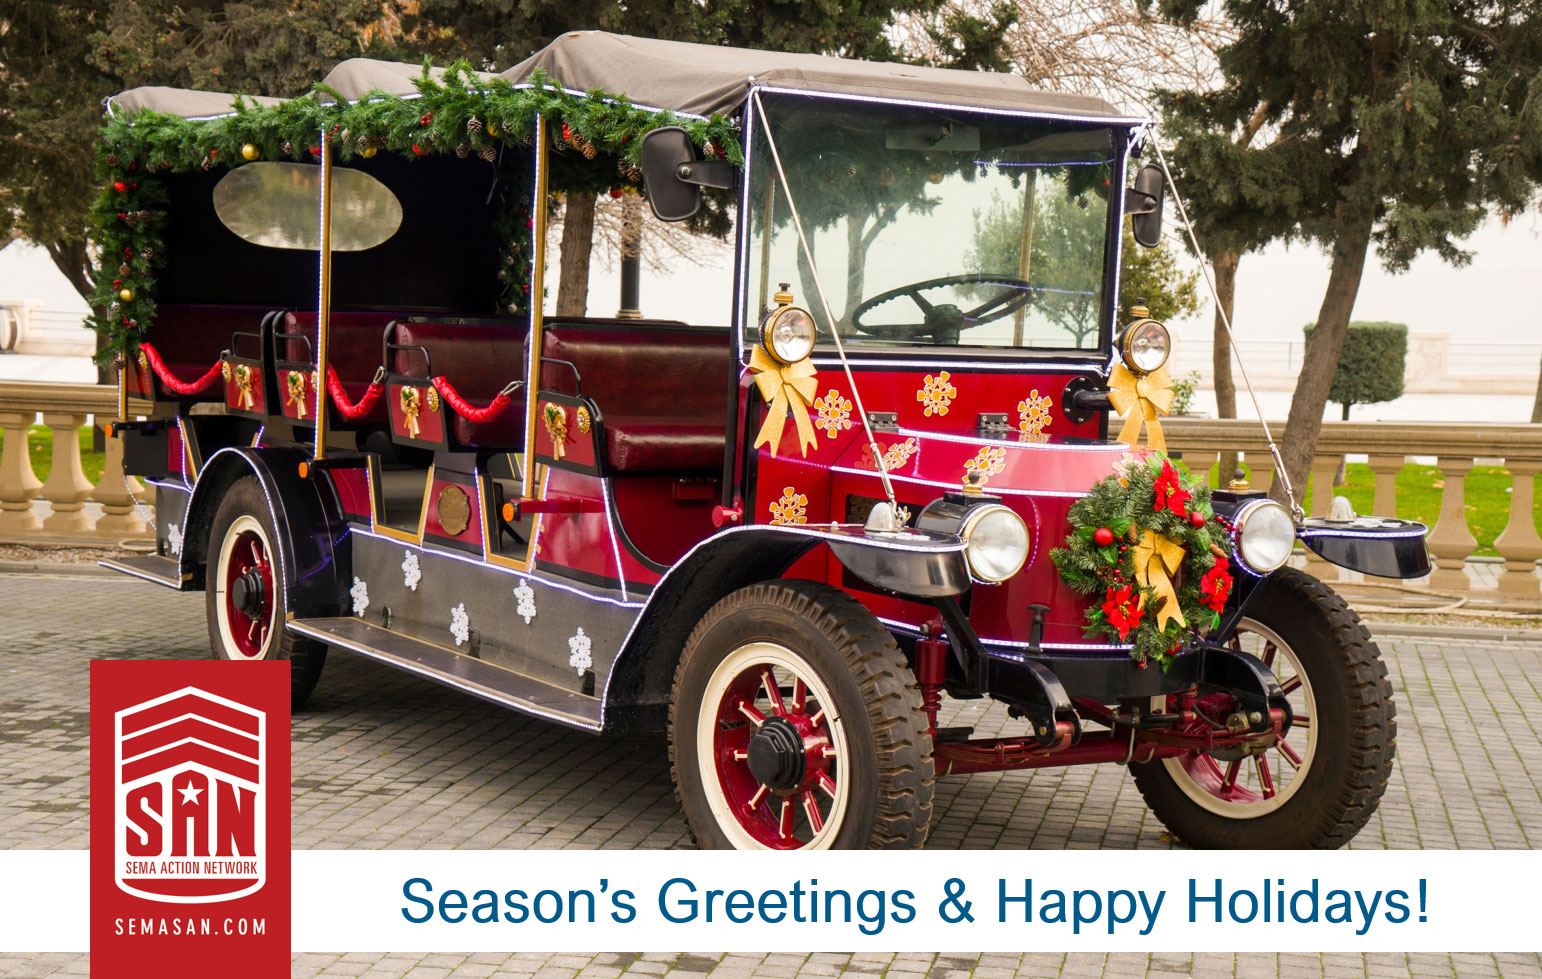 Season's Greeetings and Happy Holidays from SAN